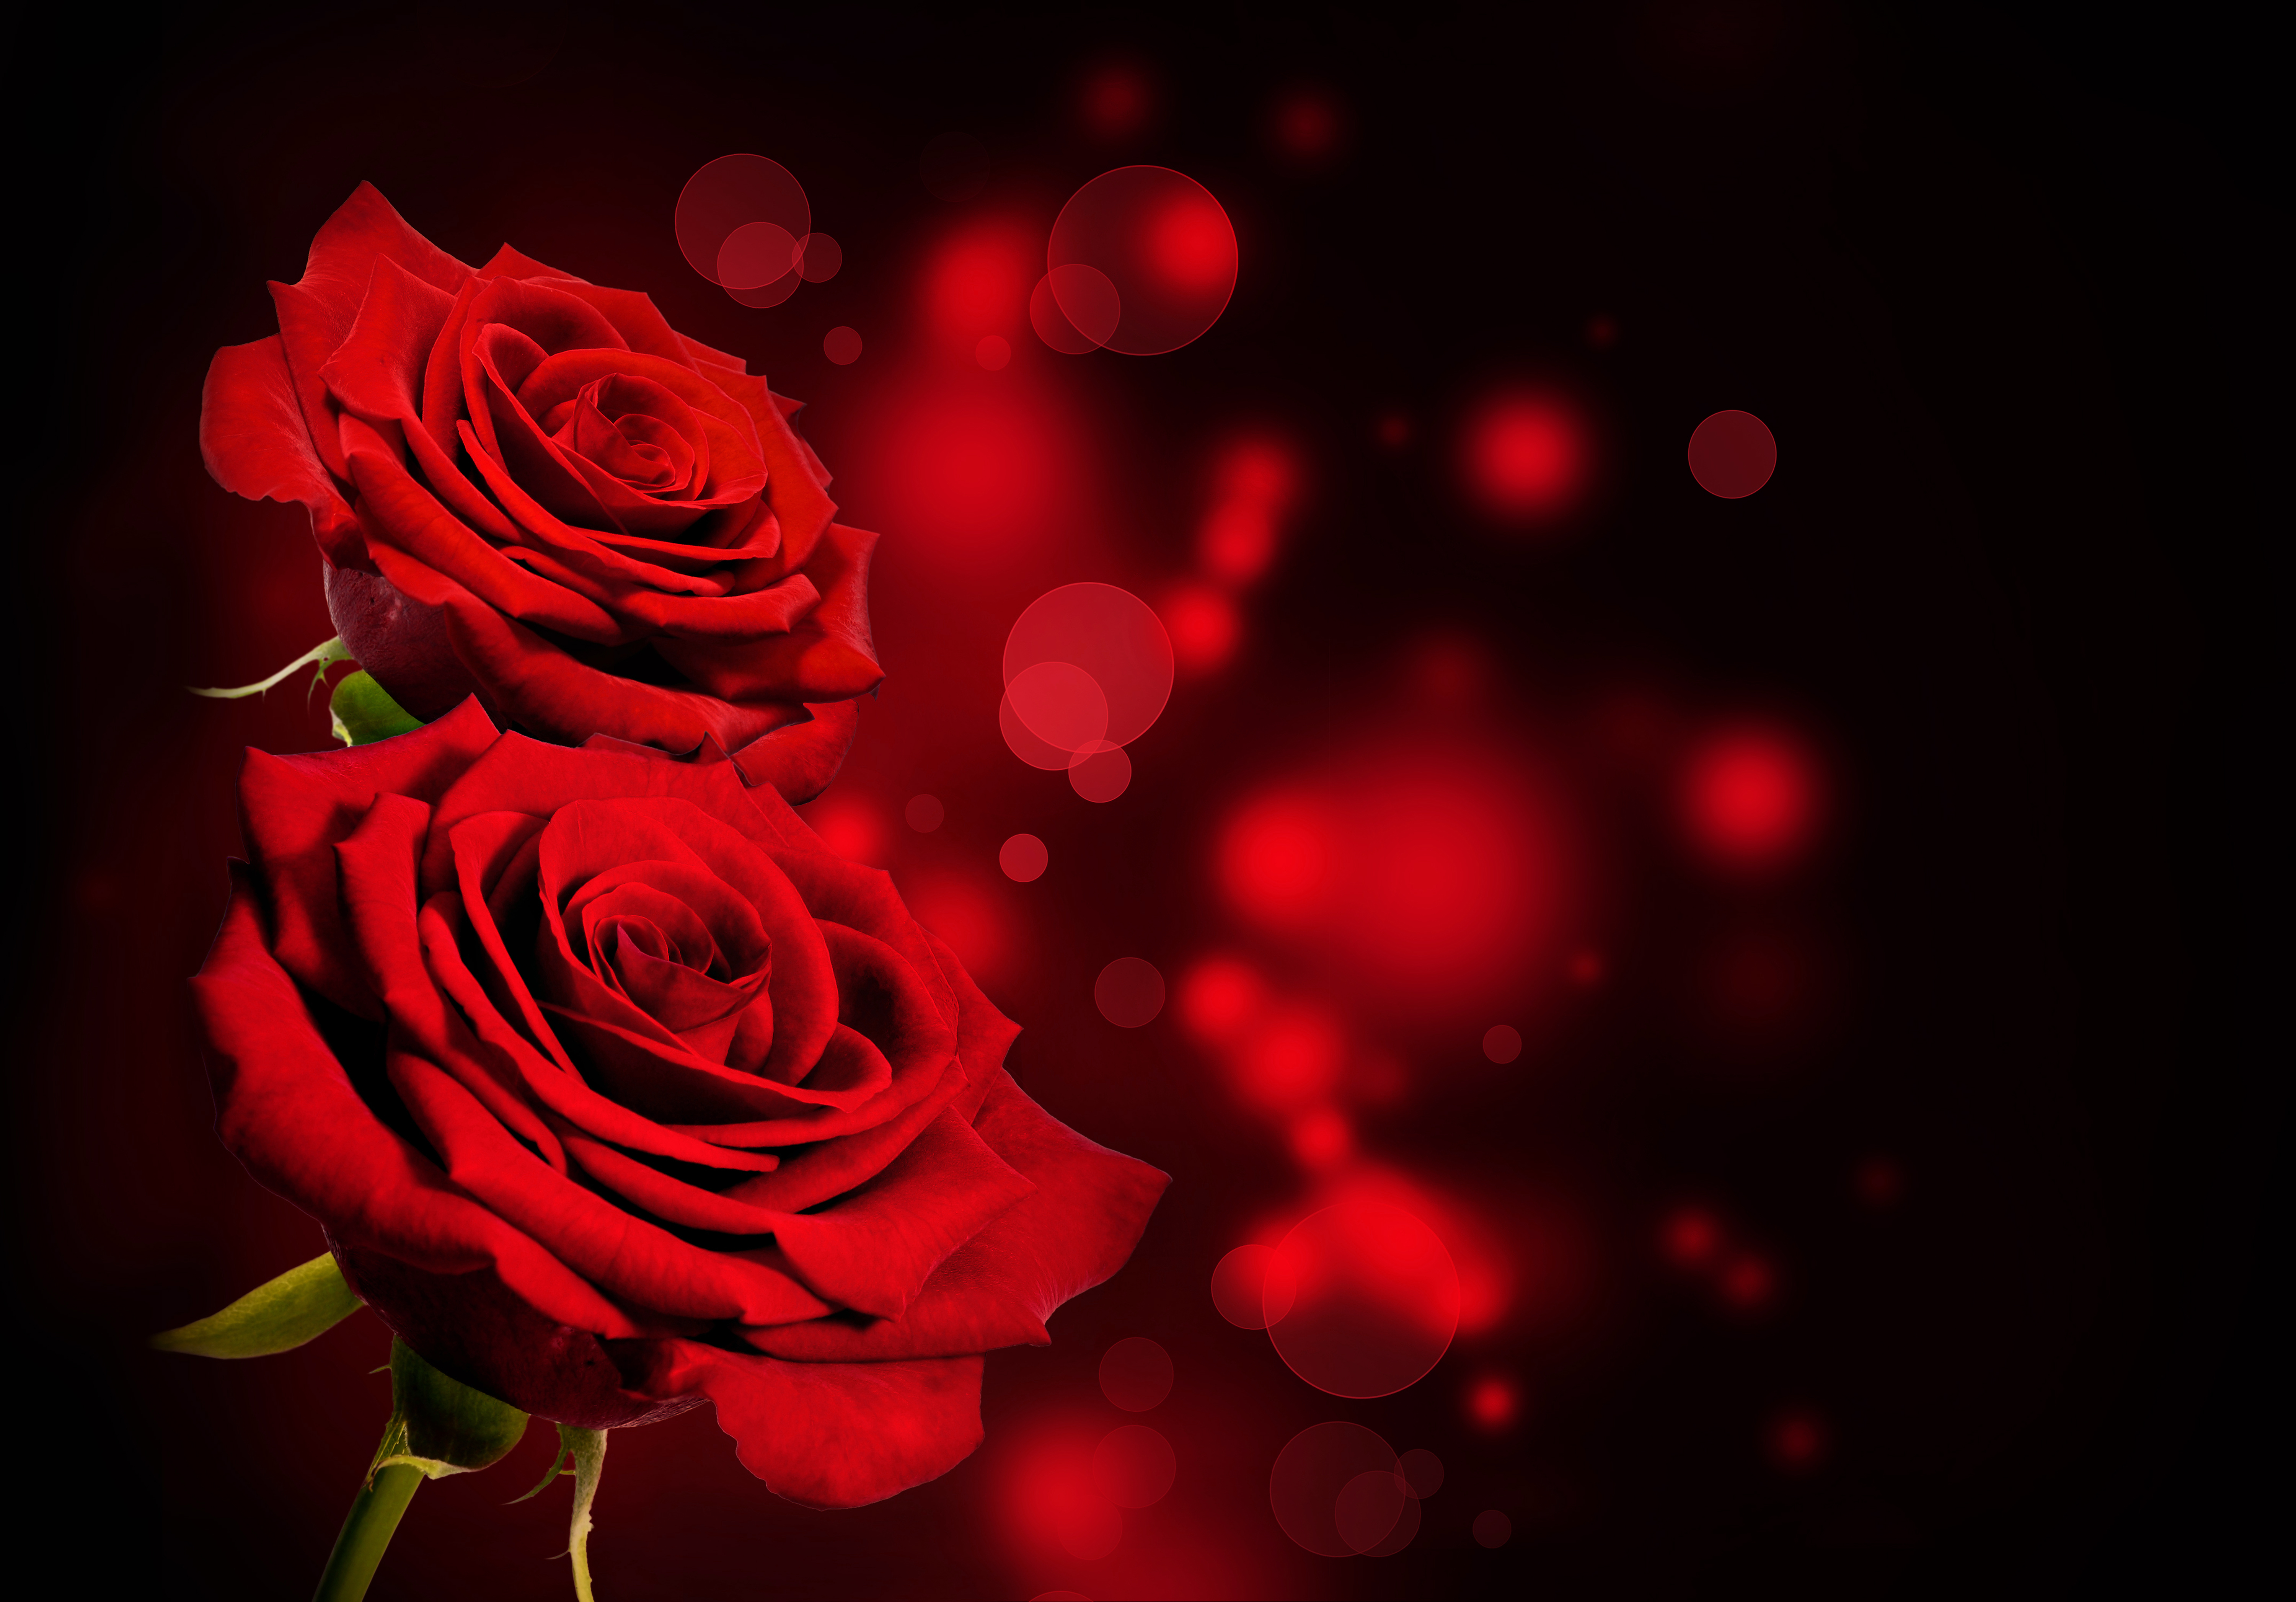 Black Background Red Roses | Gallery Yopriceville - High-Quality ...